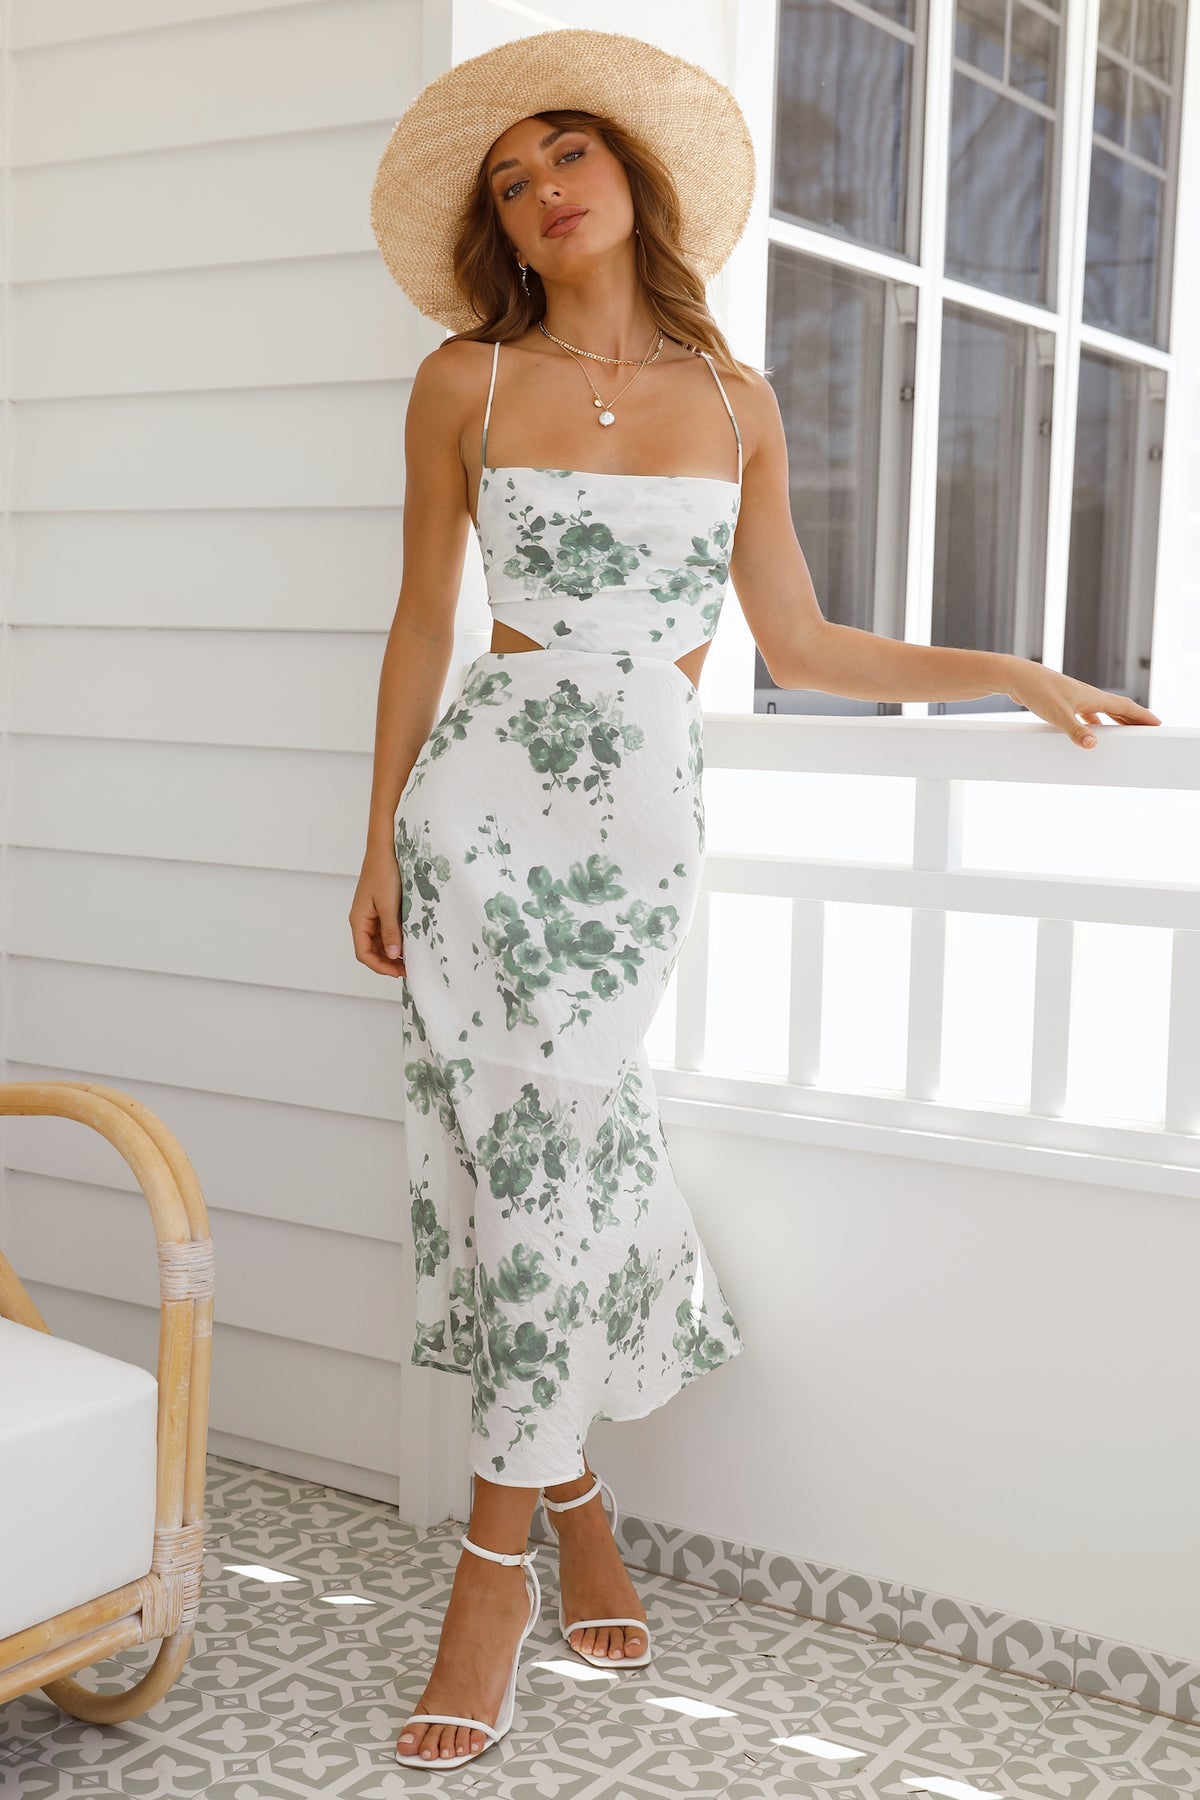 Fashion Summer Strap White Olive Floral Print Cut-Out Open Back Tie-Up Maxi Dress